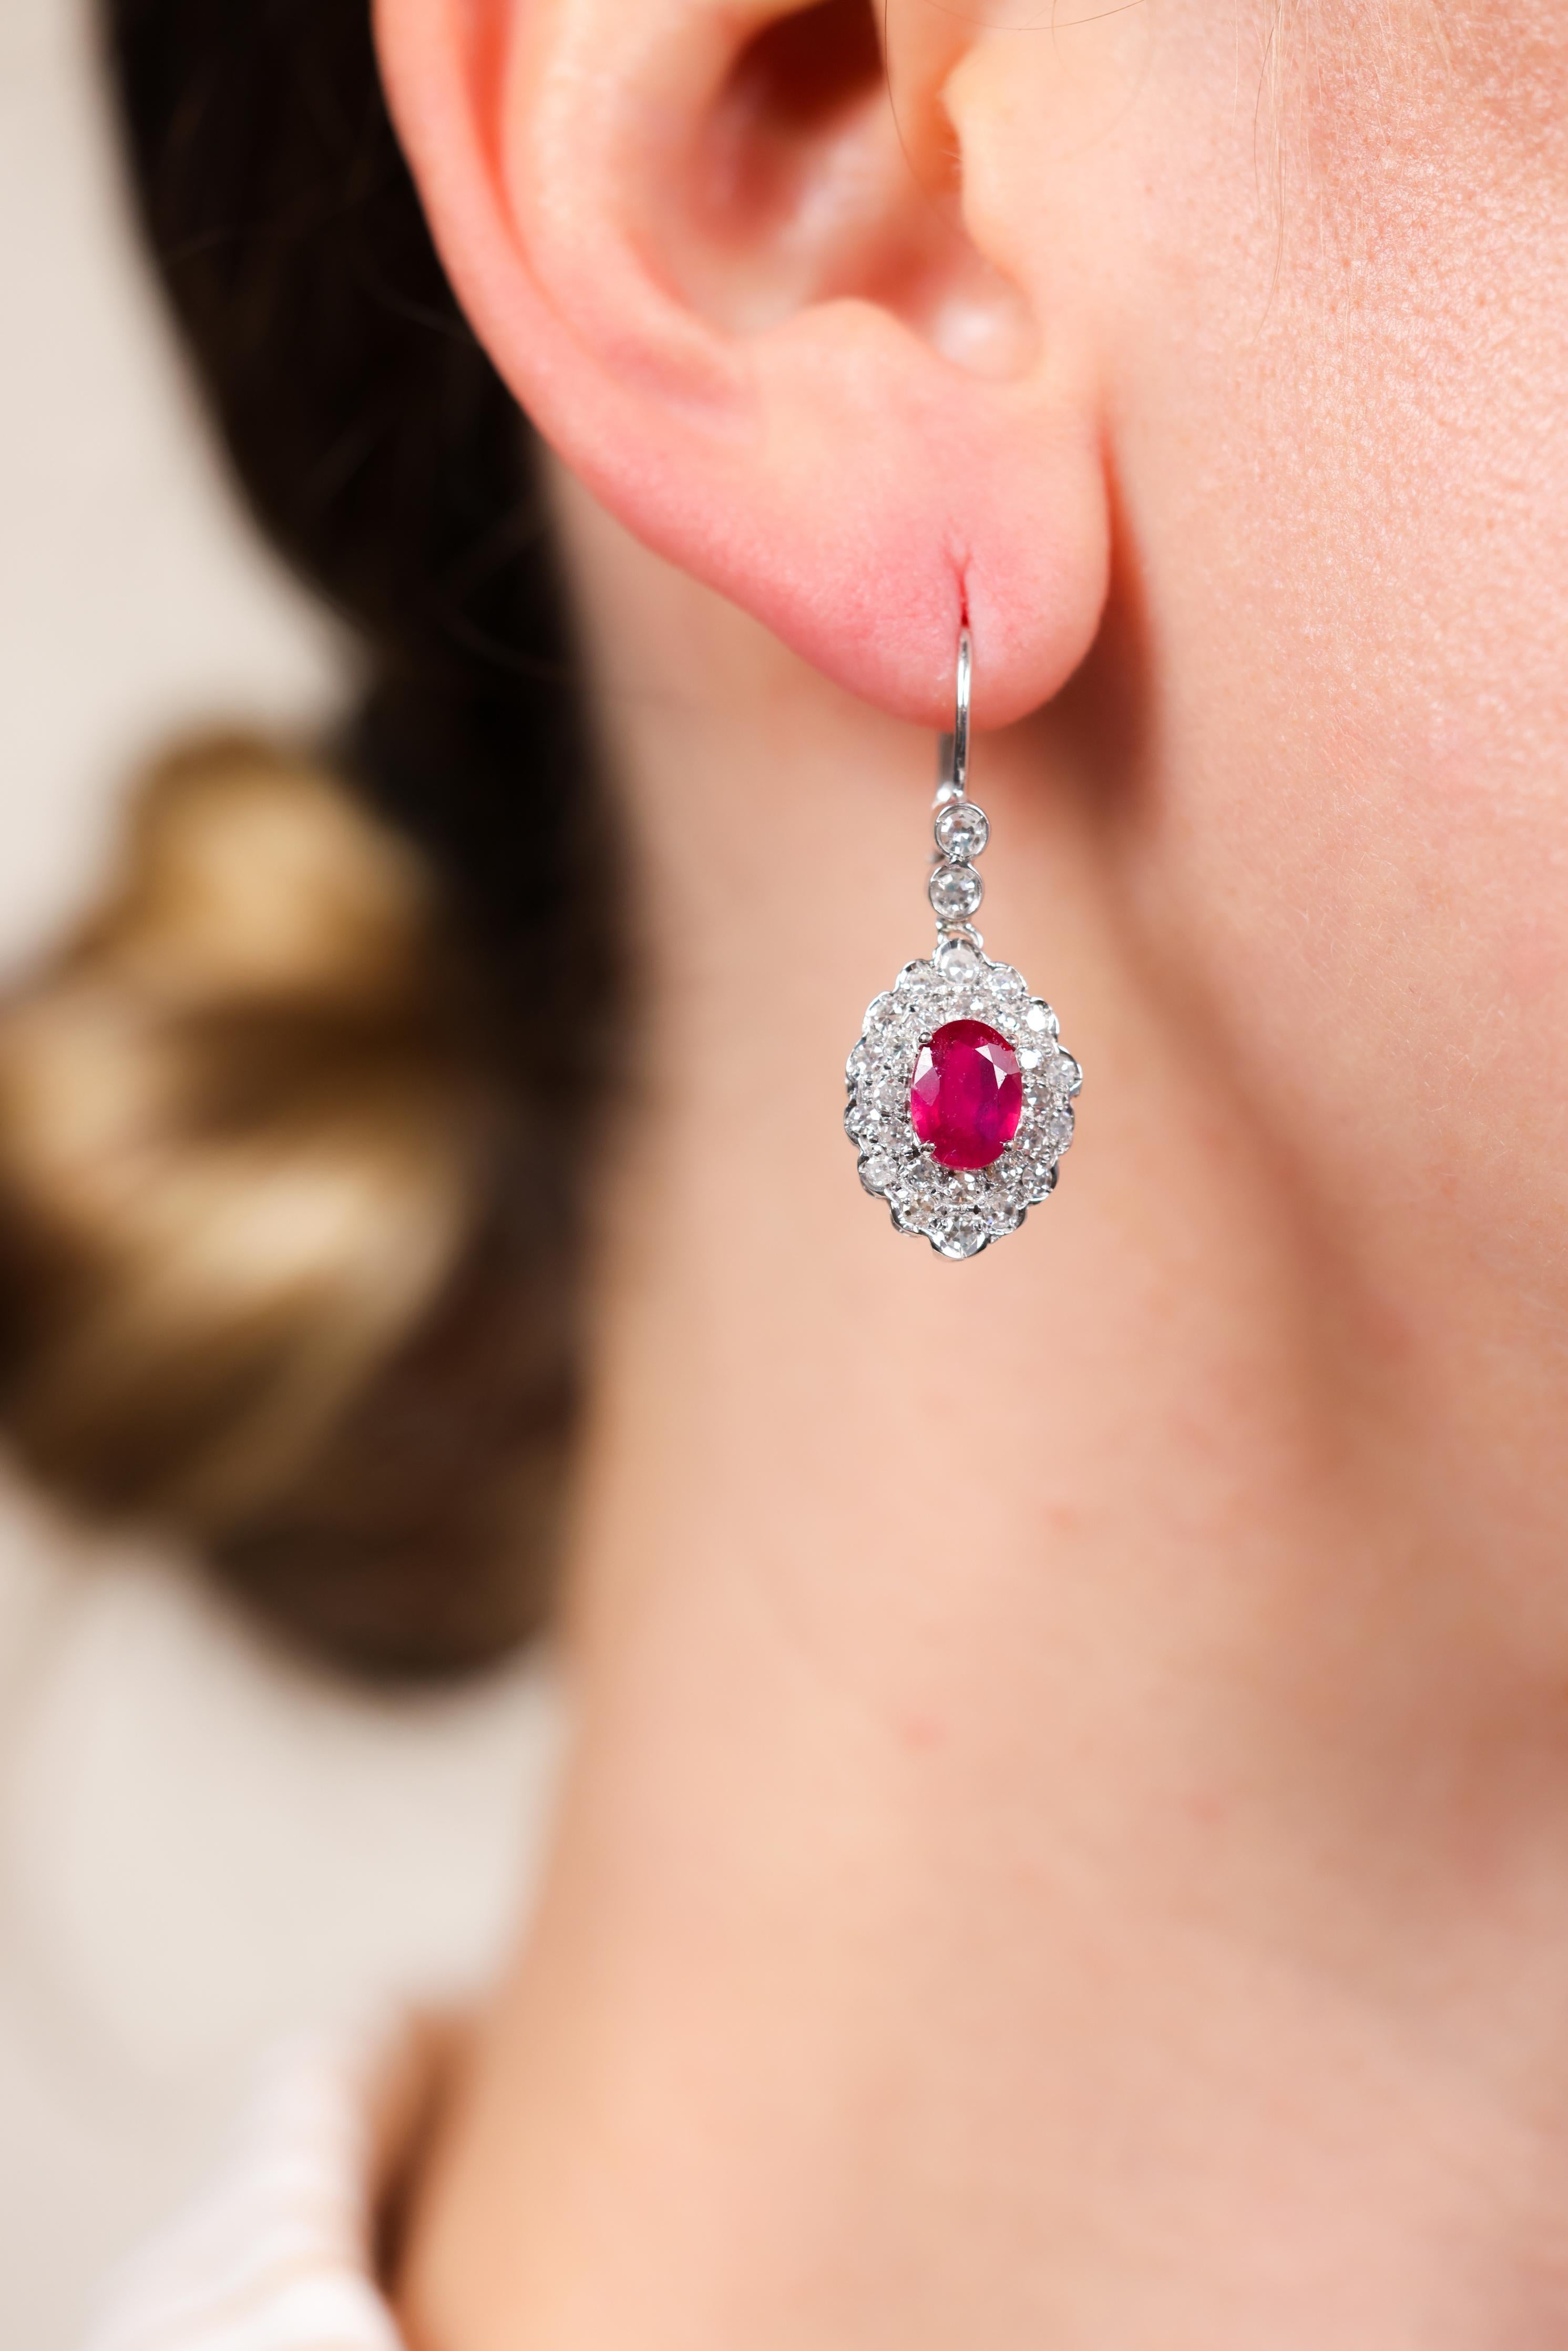 One Pair of Art Deco Revival Ruby Diamond 18k White Gold Drop Earrings. Featuring two oval mixed cut rubies with a total weight of approximately 2.10 carats. Accented by 56 single cut diamonds with a total weight of approximately 2.80 carats, graded